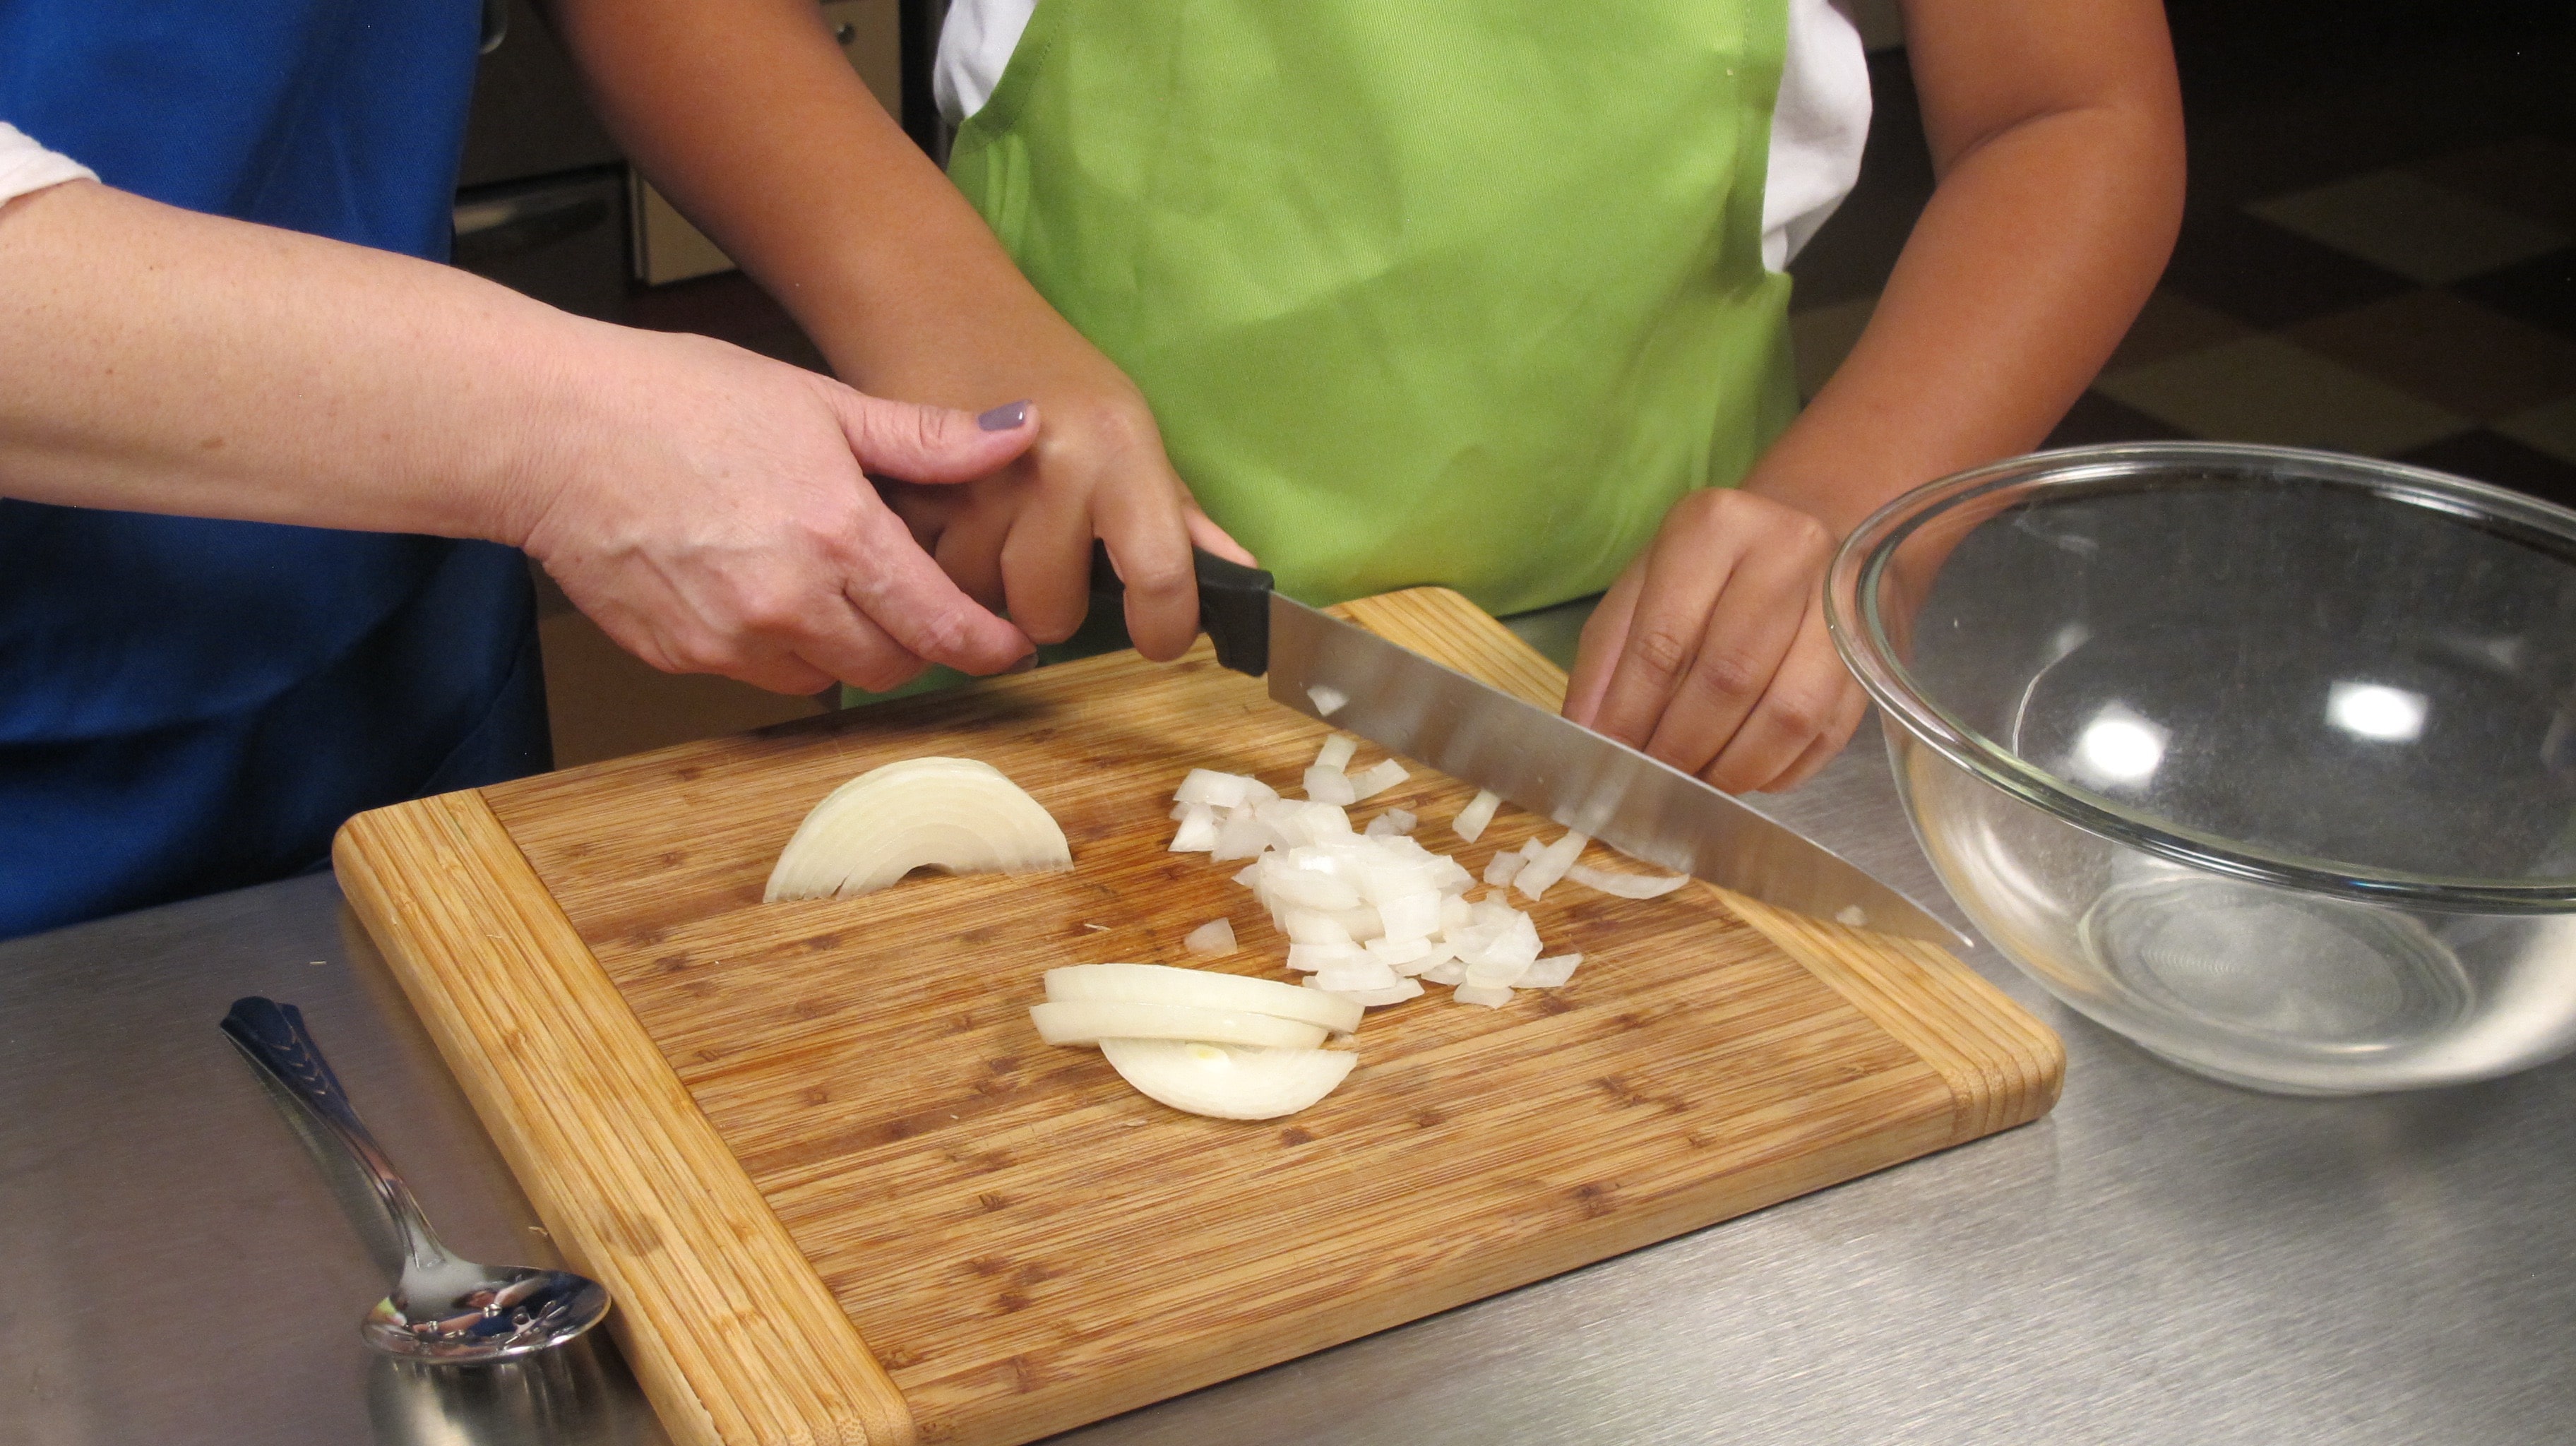 Peel skin off onion. Chop and add to bowl.